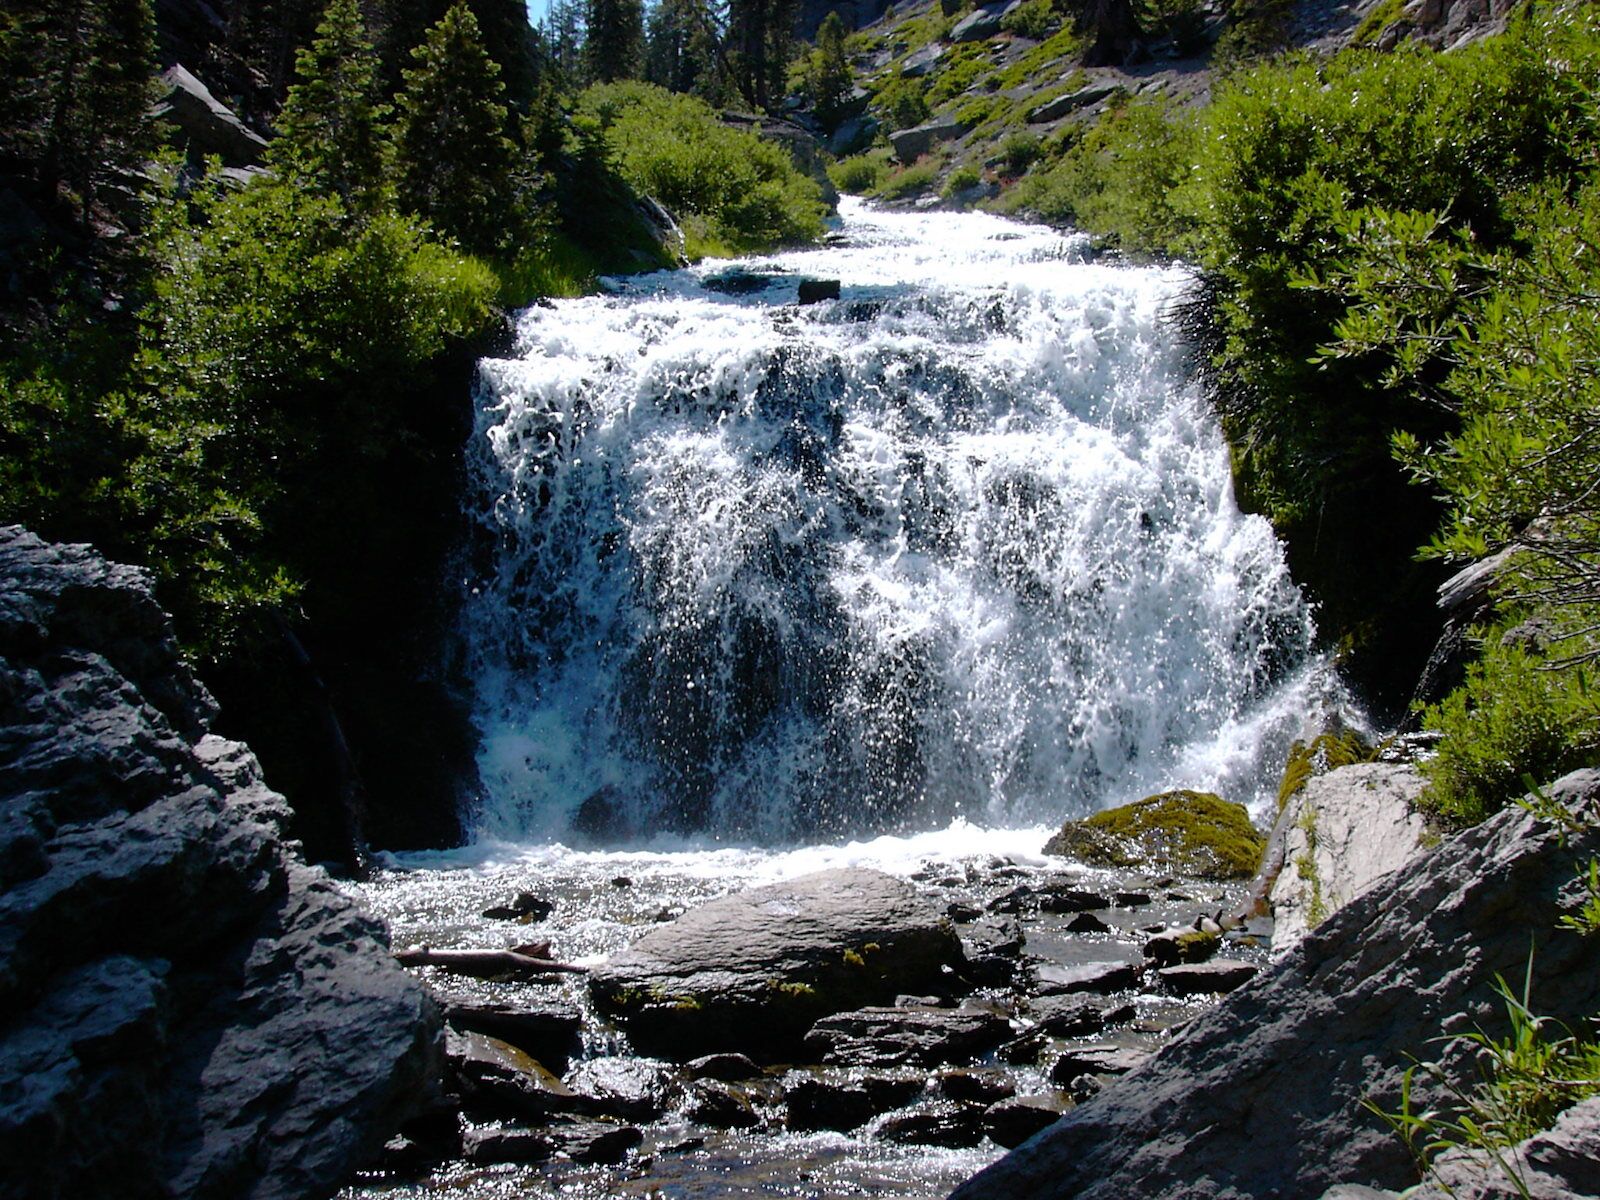  A smaller waterfall on the trail to KIngs Creek Falls.